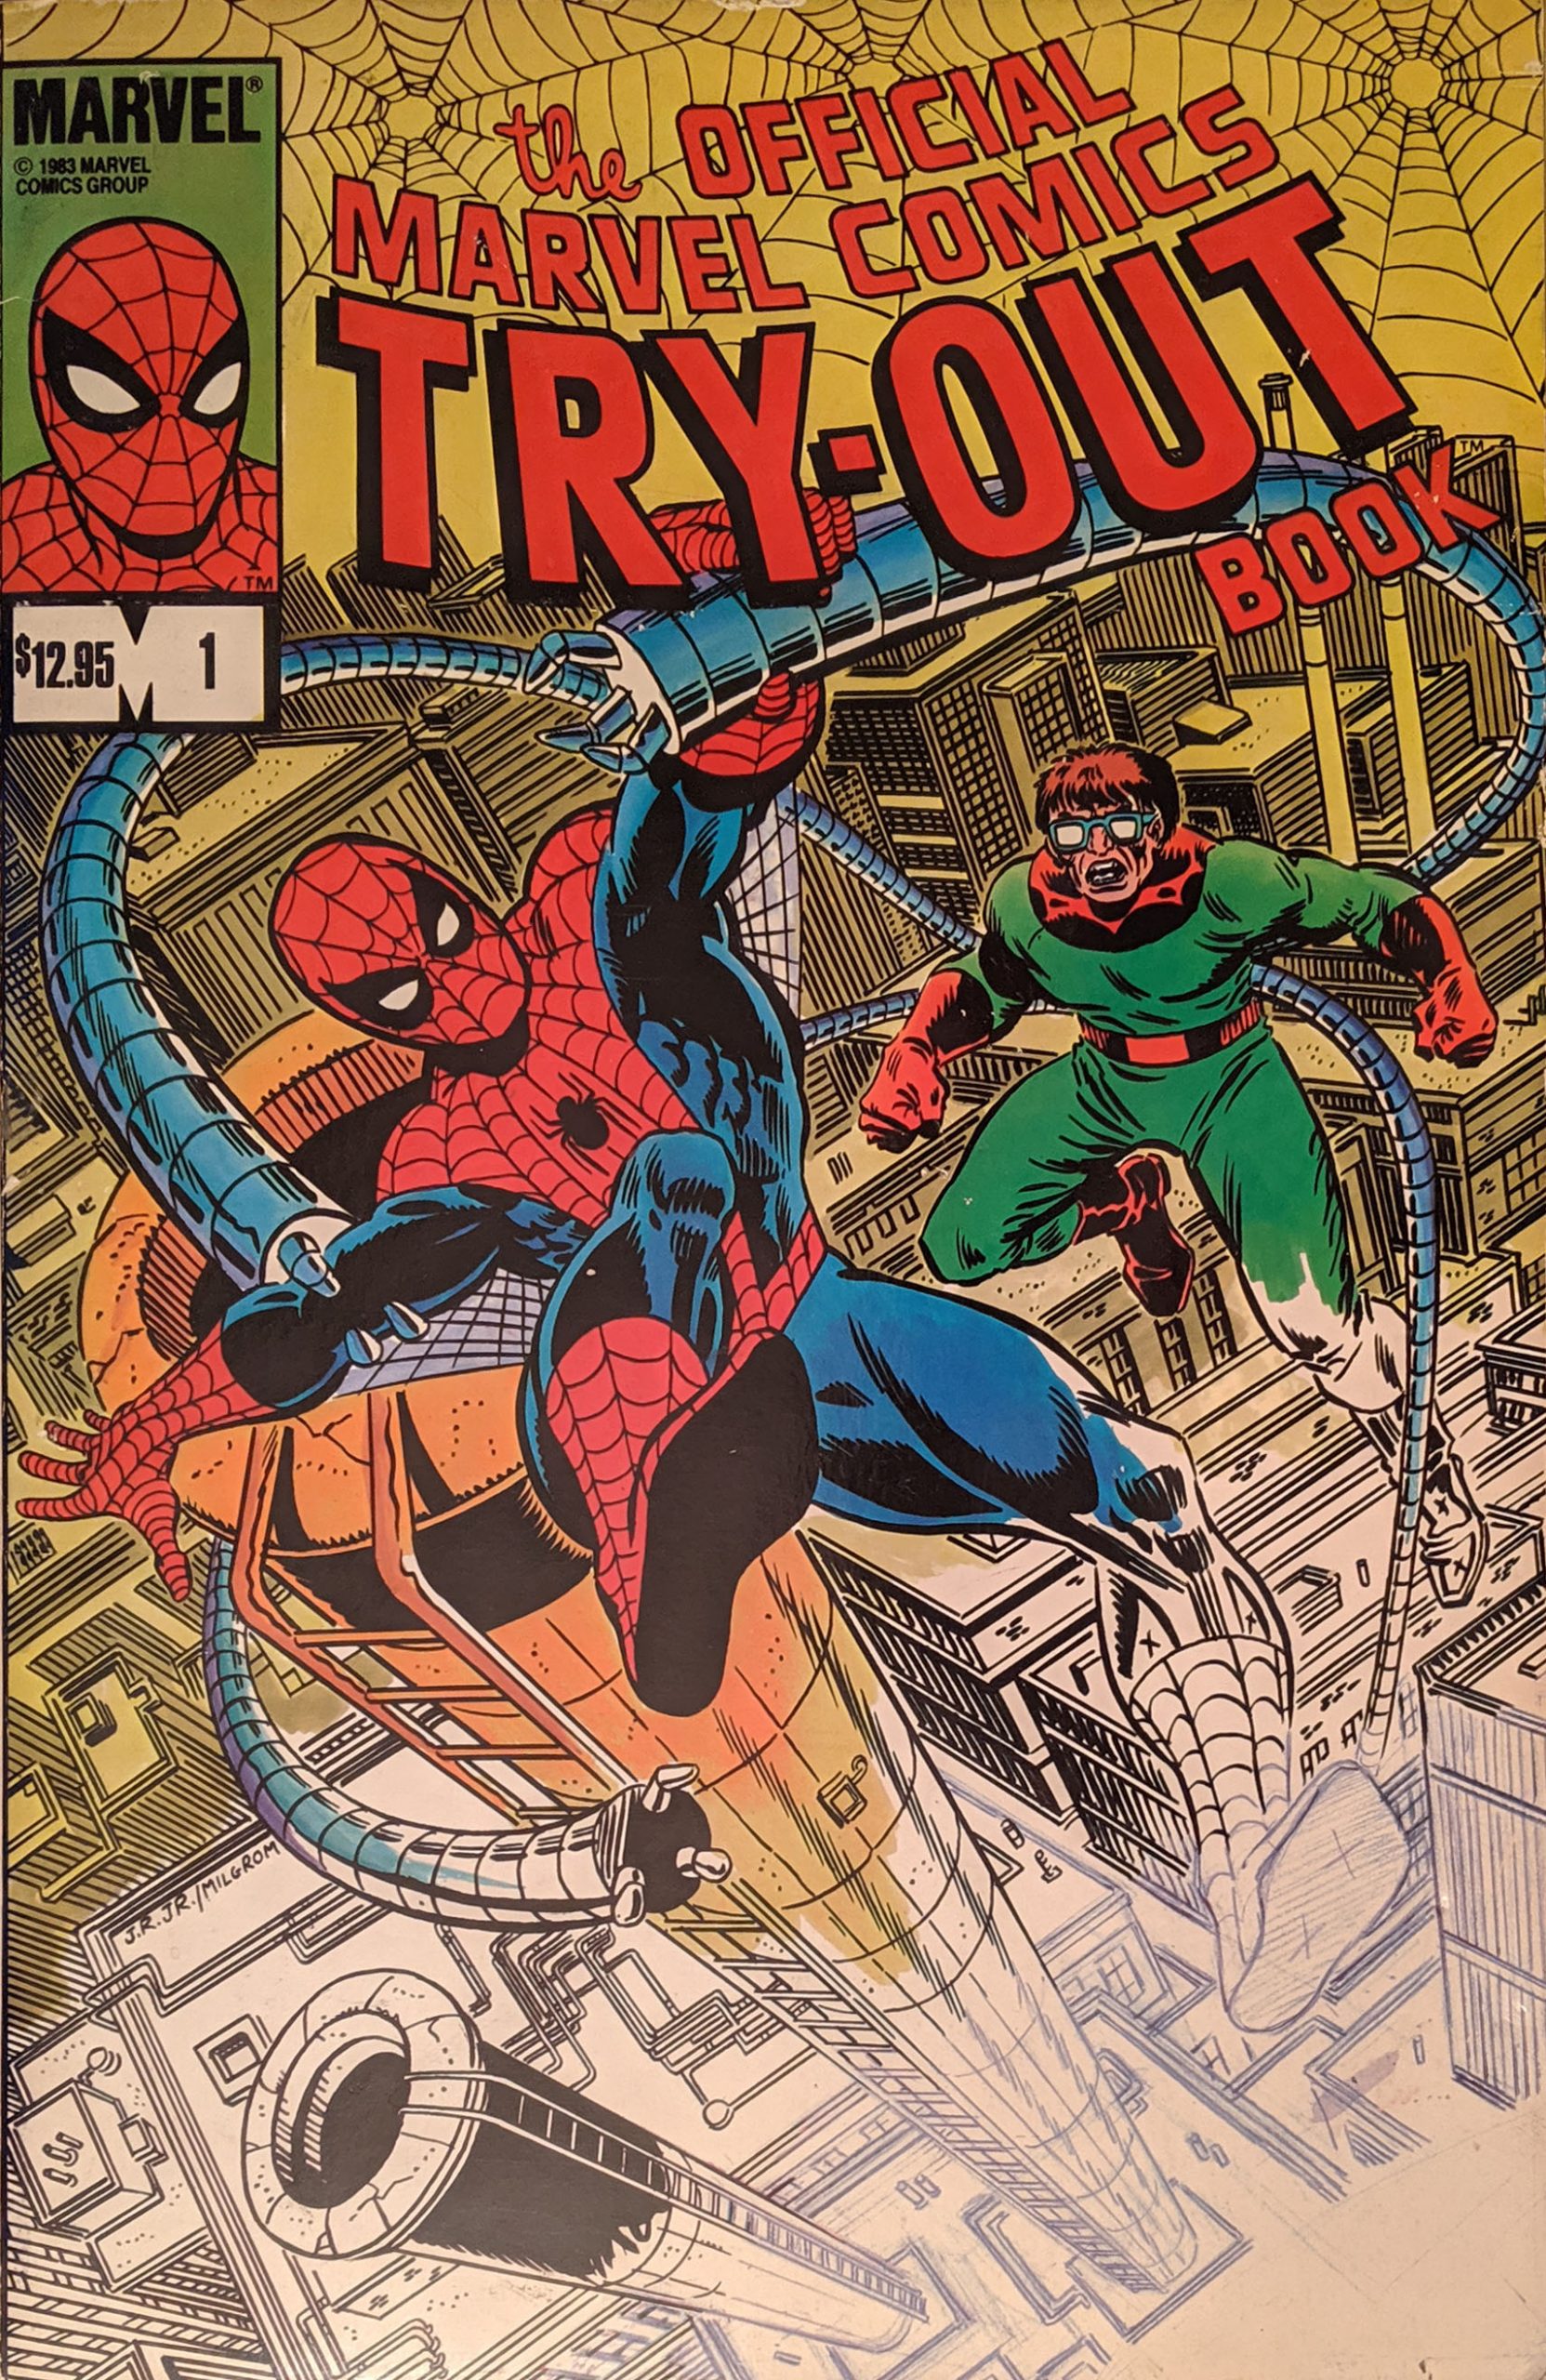 The Official Marvel Comics TryOut Book